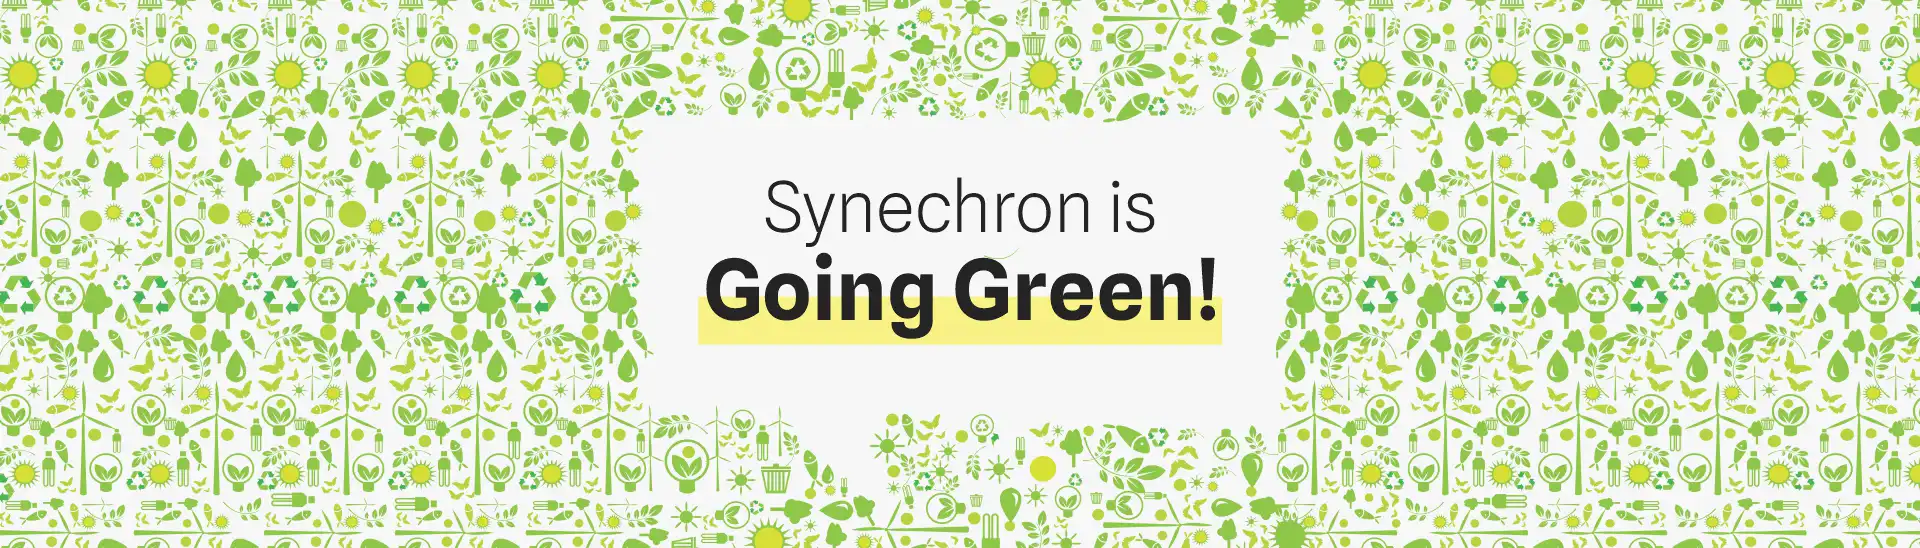 Synechron is committed to being a responsible global corporate citizen.